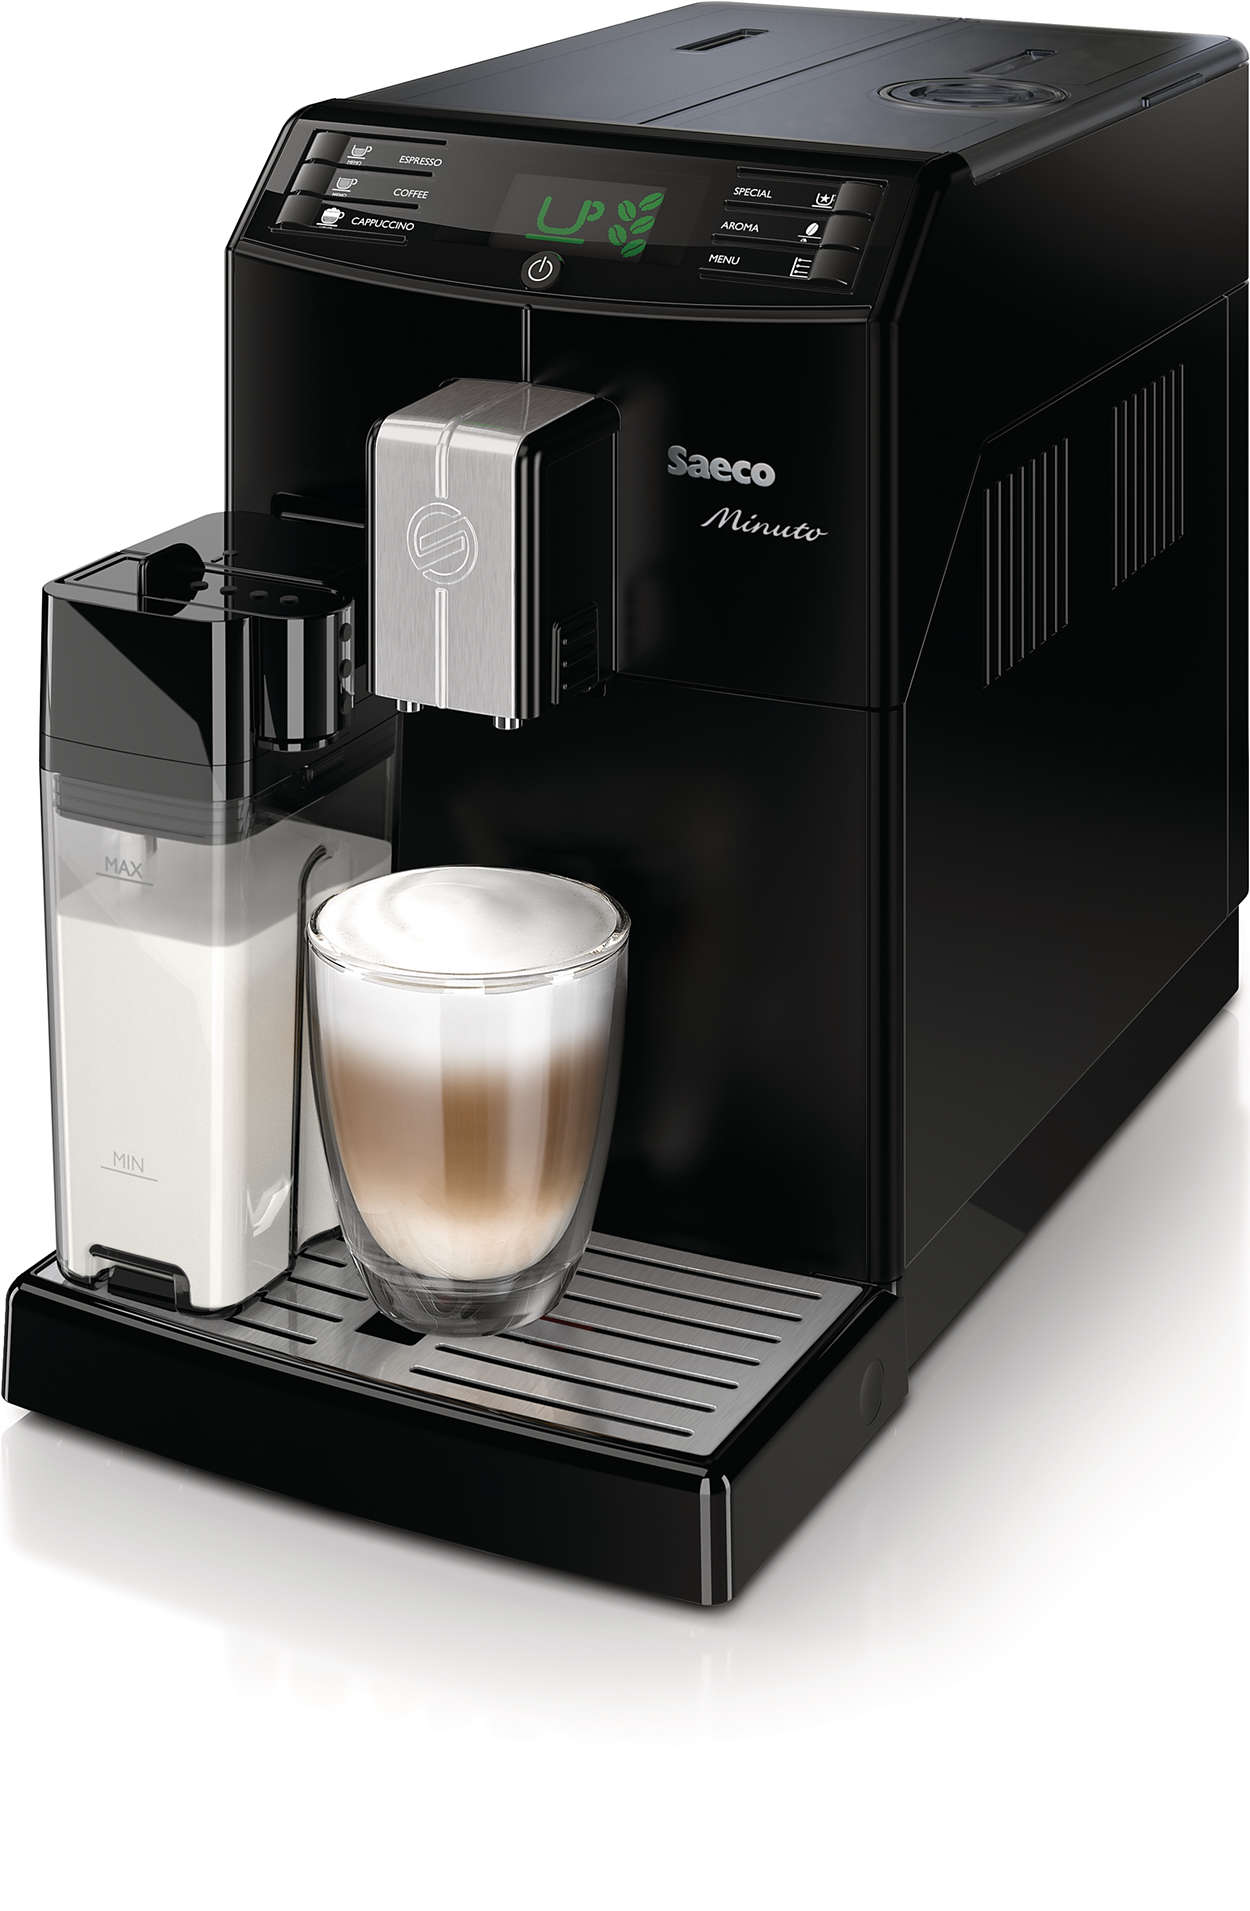 Saeco Coffee Machine Price 2017- The Only Price Guide You Need